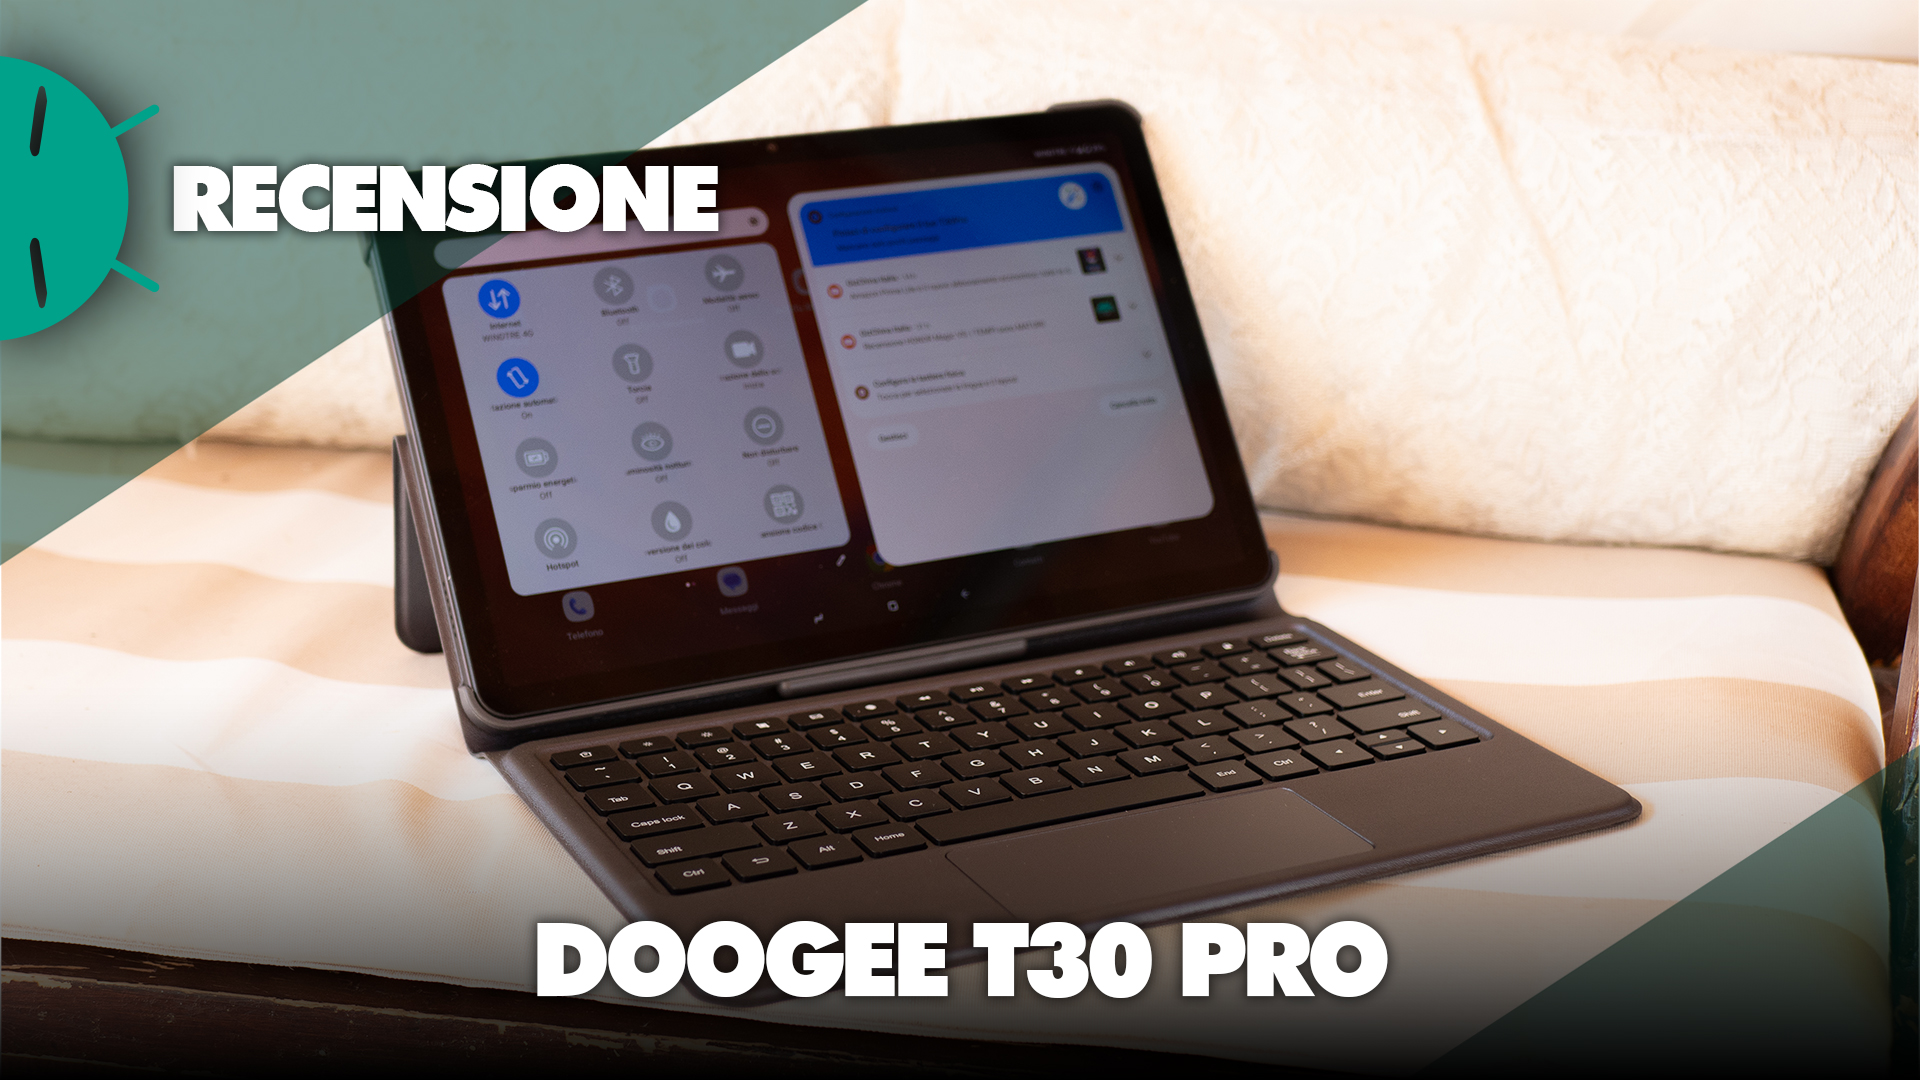 Doogee T30 Pro Tablet. Quite an improvement in performance over